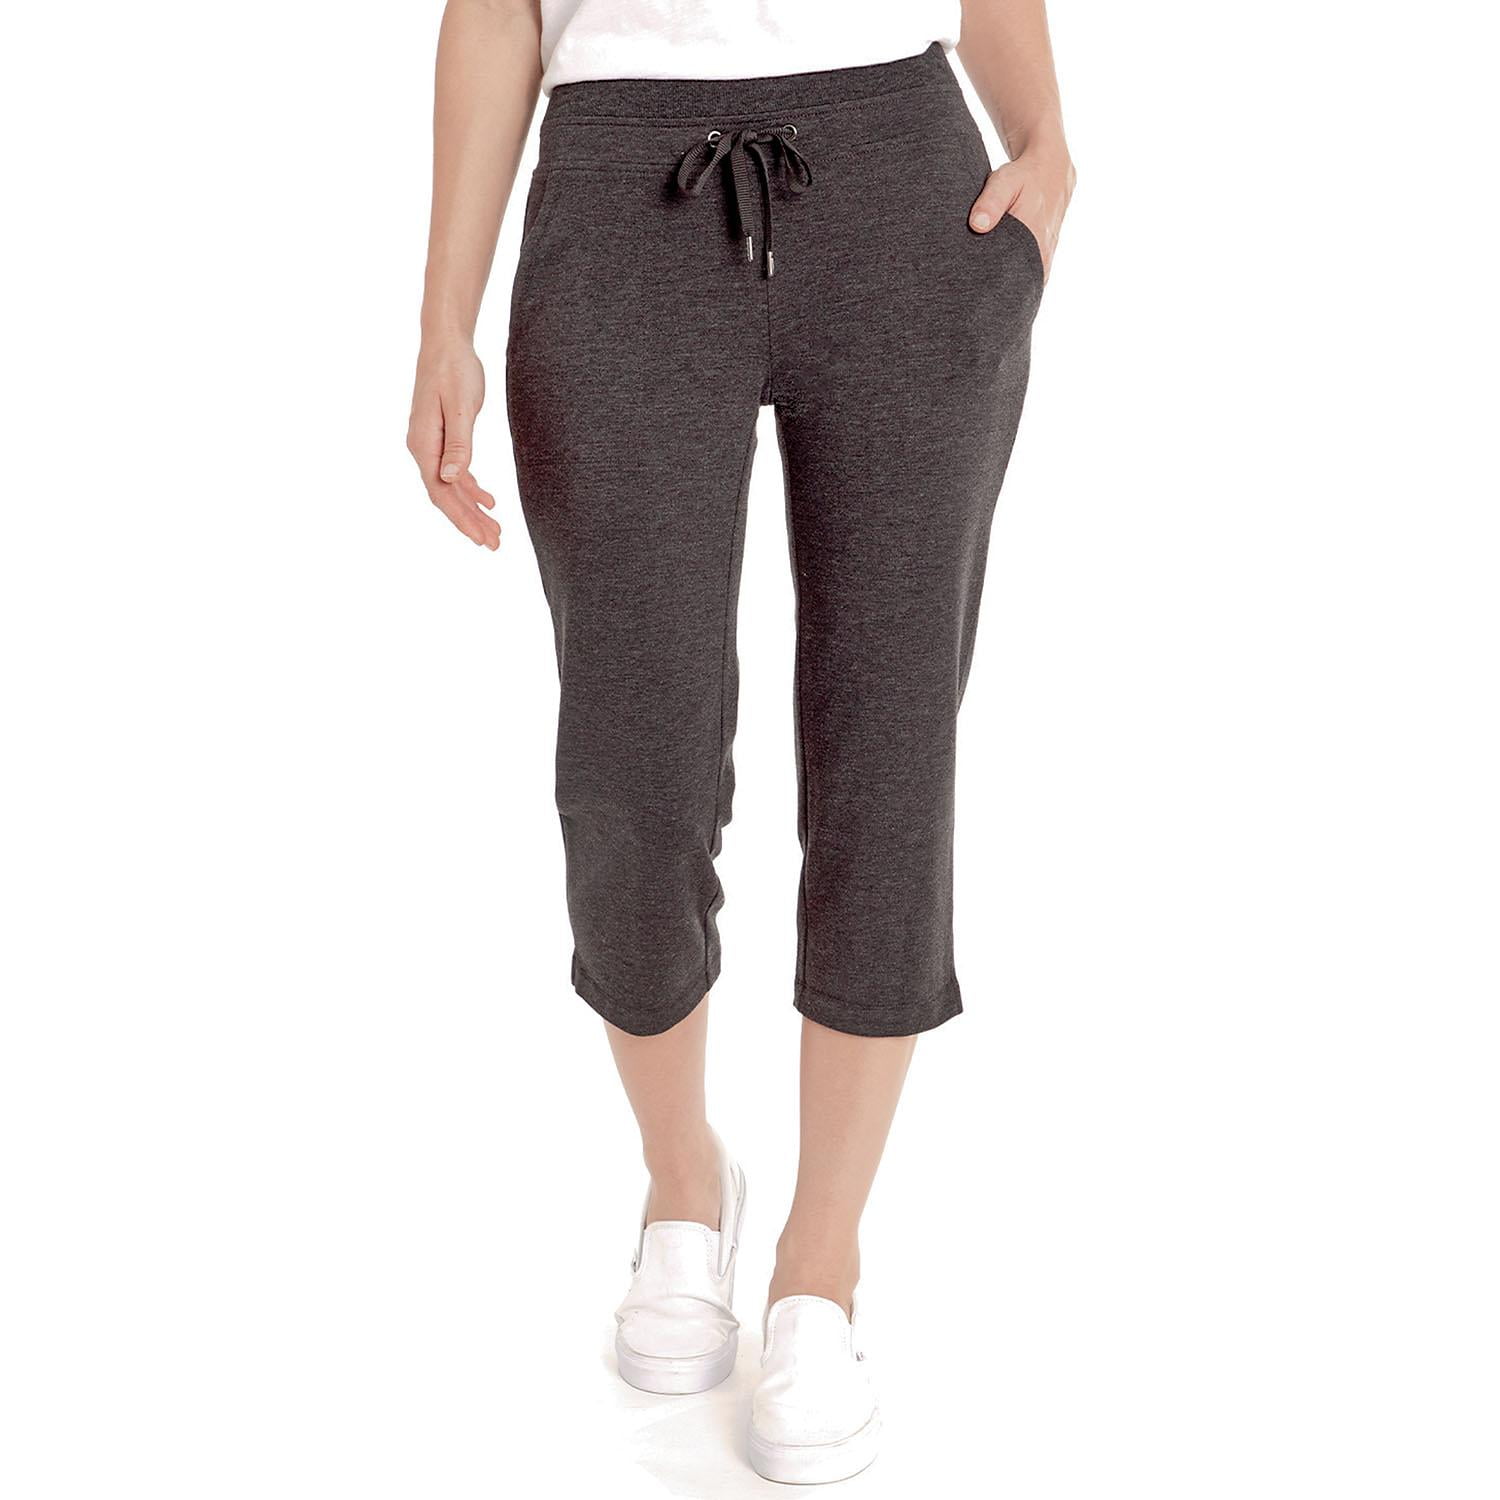 Eddie Bauer Ladies French Terry Capri in Charcoal, Size Small - Walmart.com